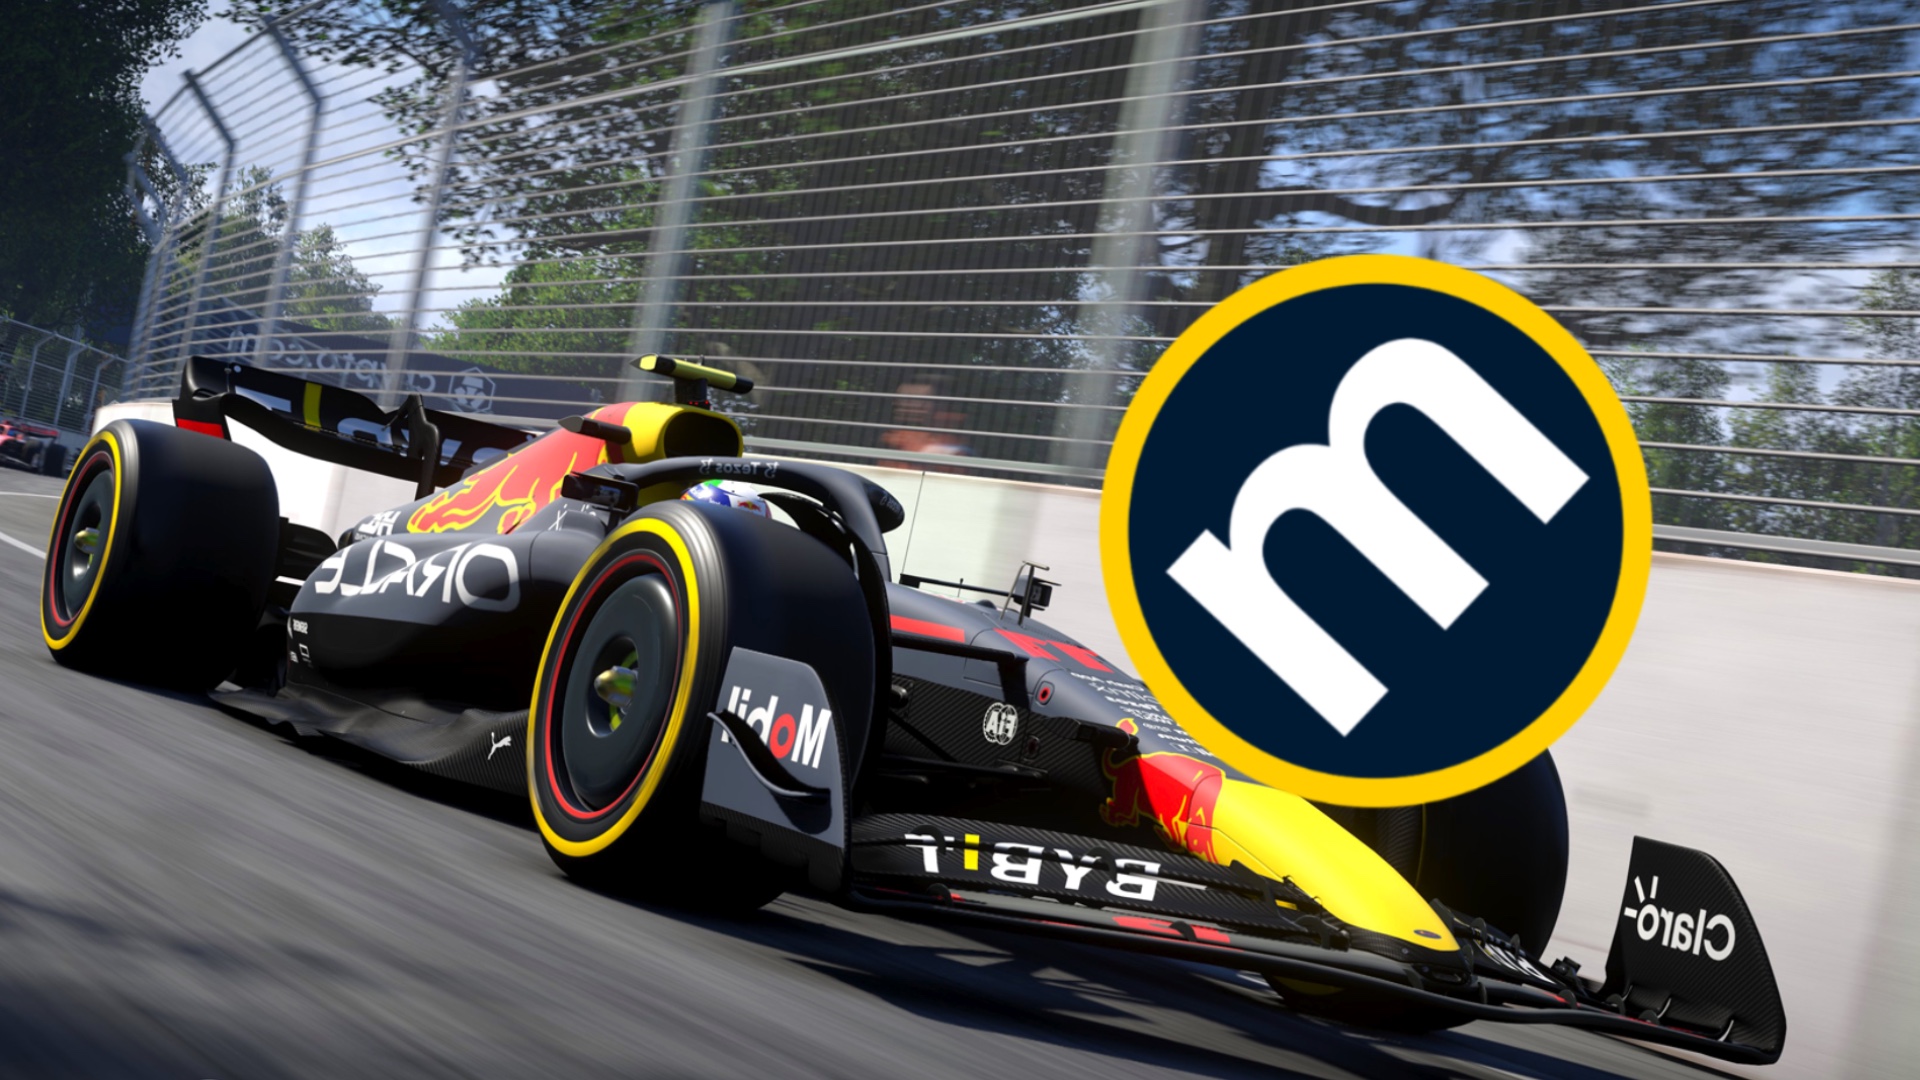 F1 22 game review summary